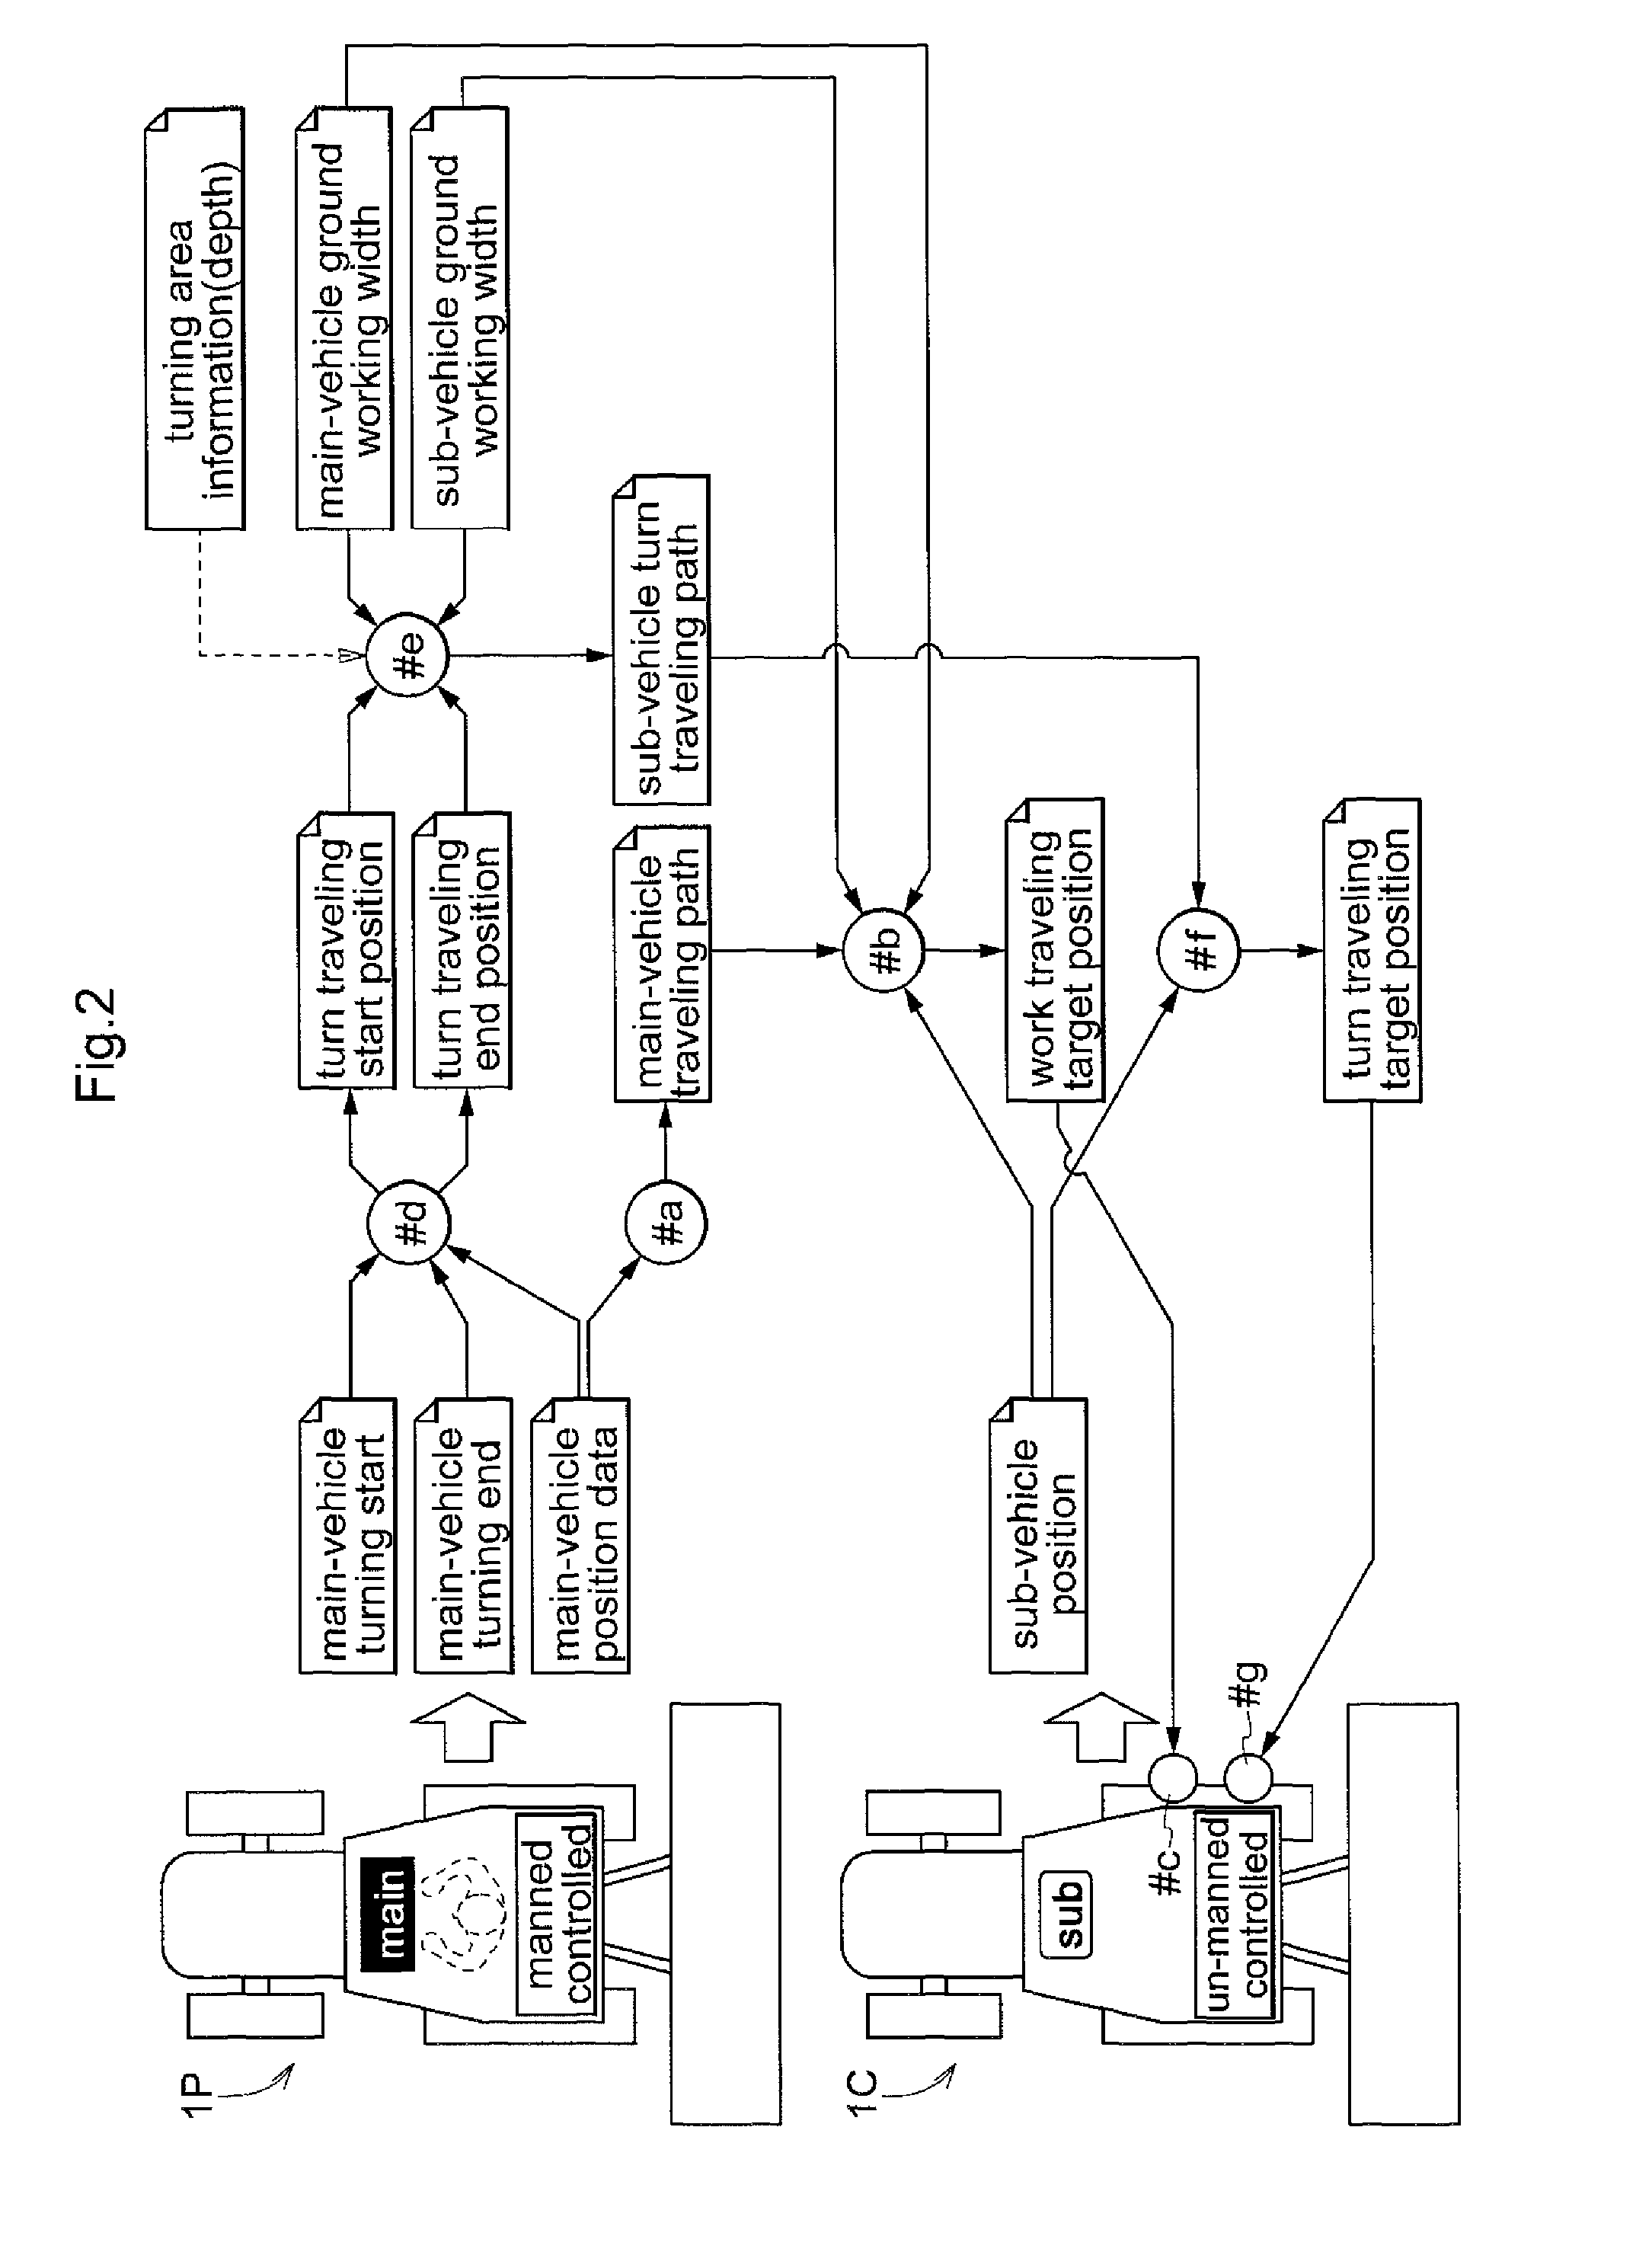 Work vehicle coordinating system